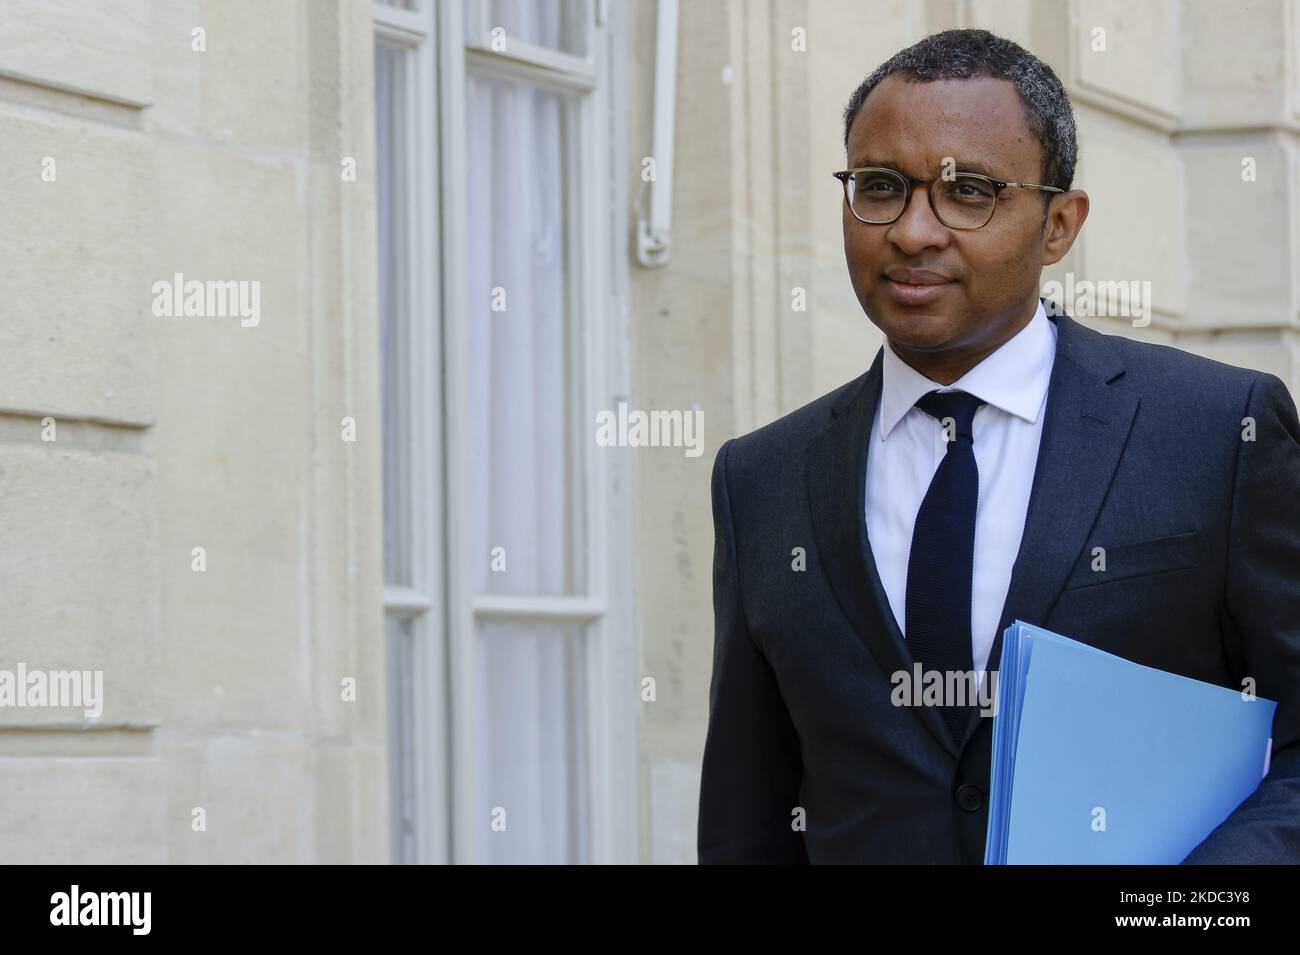 FRANCE - PARIS – GOVERNMENT – POLITICS - French Education and Youth Minister Pap Ndiaye leaves the cabinet meeting at the Elysee Palace - June 14, 2022, Paris. (Photo by Daniel Pier/NurPhoto) Stock Photo